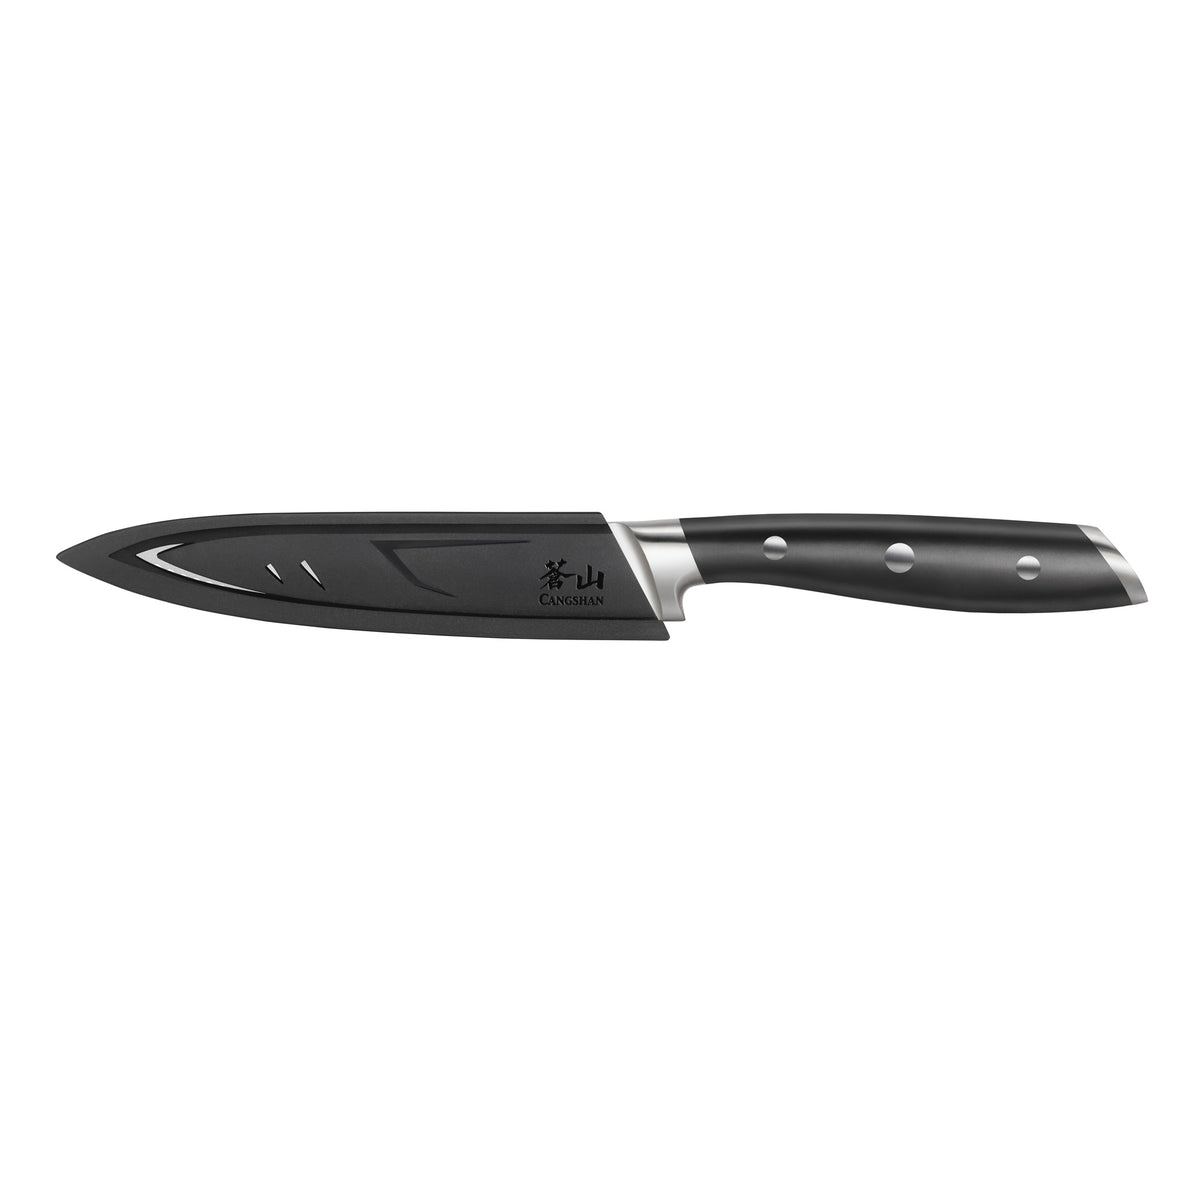 ALPS Series 3.5-Inch Paring Knife with Sheath, Forged German Steel, Bl –  Cangshan Cutlery Company